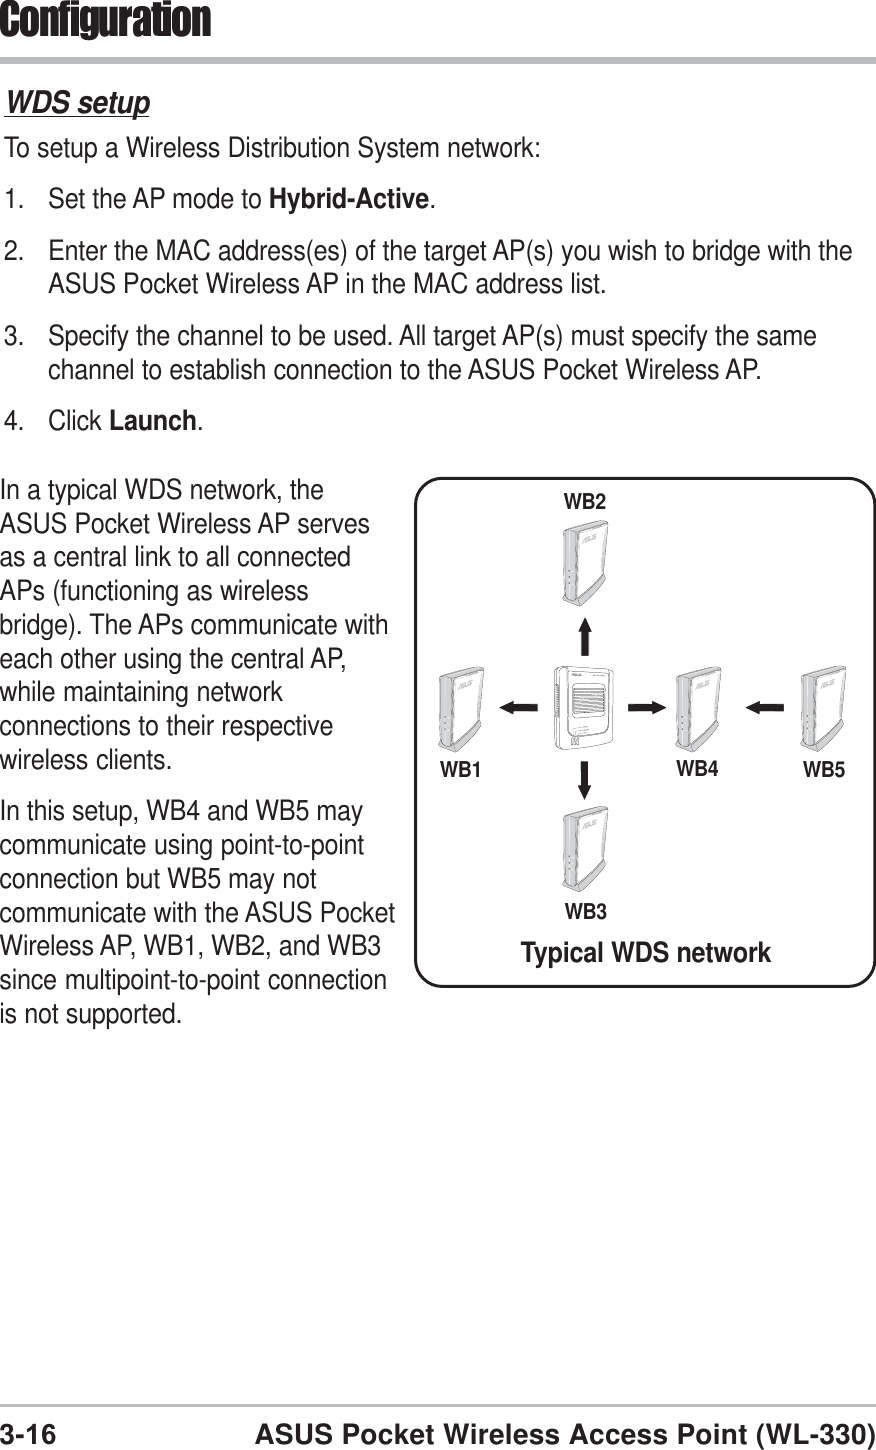 3-16 ASUS Pocket Wireless Access Point (WL-330)ConfigurationWDS setupTo setup a Wireless Distribution System network:1. Set the AP mode to Hybrid-Active.2. Enter the MAC address(es) of the target AP(s) you wish to bridge with theASUS Pocket Wireless AP in the MAC address list.3. Specify the channel to be used. All target AP(s) must specify the samechannel to establish connection to the ASUS Pocket Wireless AP.4. Click Launch.Typical WDS networkWB2WB4WB1WB3WB5In a typical WDS network, theASUS Pocket Wireless AP servesas a central link to all connectedAPs (functioning as wirelessbridge). The APs communicate witheach other using the central AP,while maintaining networkconnections to their respectivewireless clients.In this setup, WB4 and WB5 maycommunicate using point-to-pointconnection but WB5 may notcommunicate with the ASUS PocketWireless AP, WB1, WB2, and WB3since multipoint-to-point connectionis not supported.